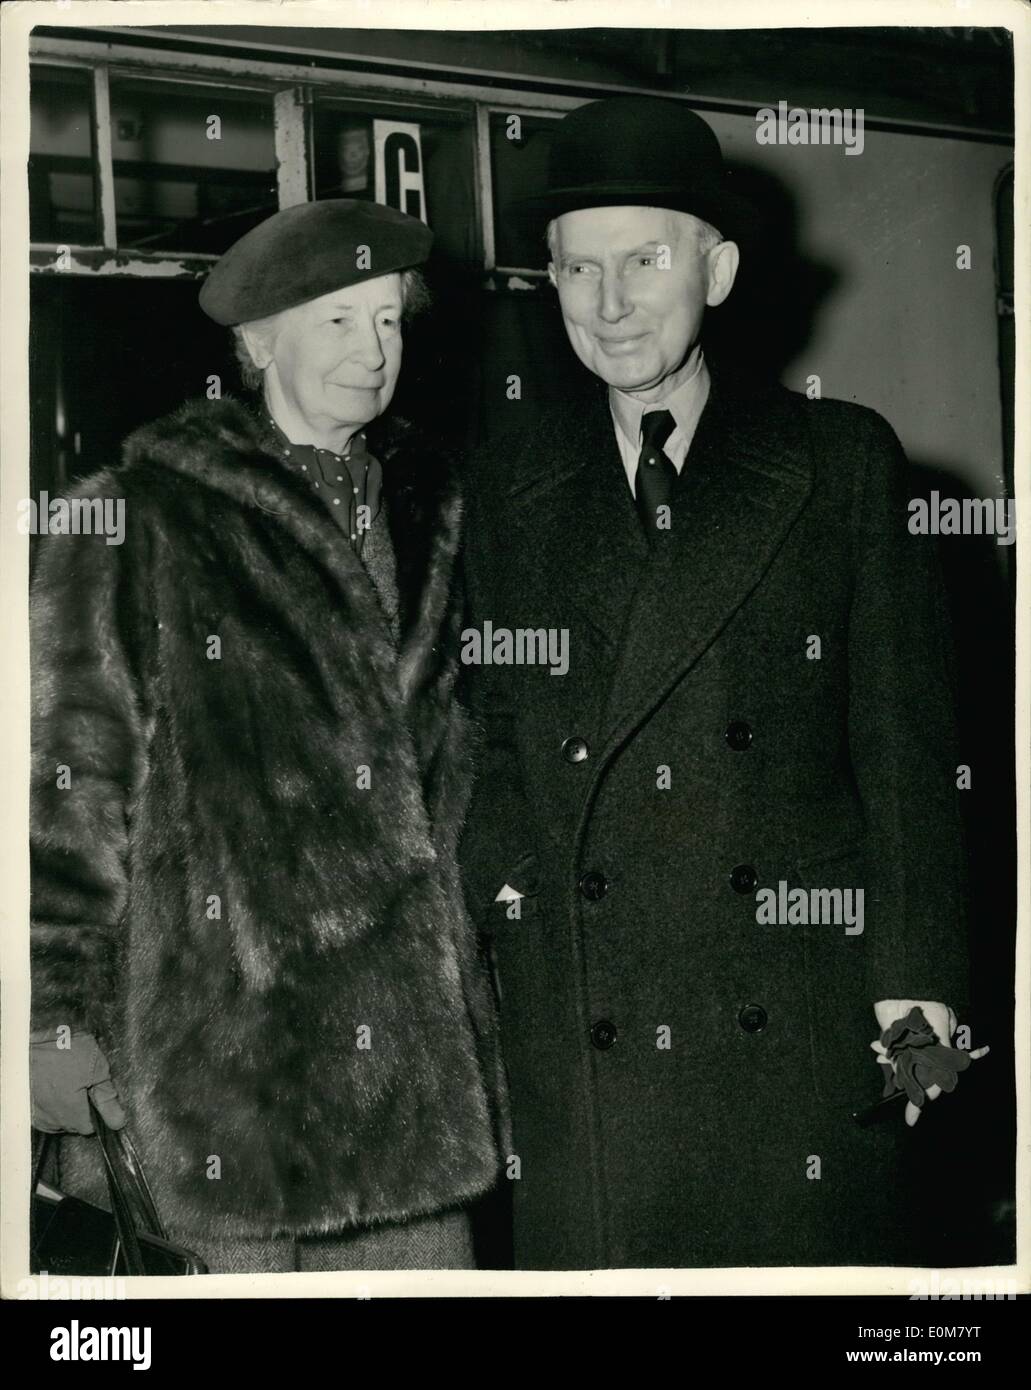 Nov. 24, 1953 - 24-11-53 Count and Countess Reventlow leave for Denmark. The Danish Ambassador, Count Reventlow, and Countess Reventlow left this morning on a visit to Denmark, to celebrate the Count's 70th birthday. They will be returning to London before the Ambassador retires in December. Keystone Photo Shows: Count and Countess Reventlow see as they left Liverpool Street Station this morning. Stock Photo